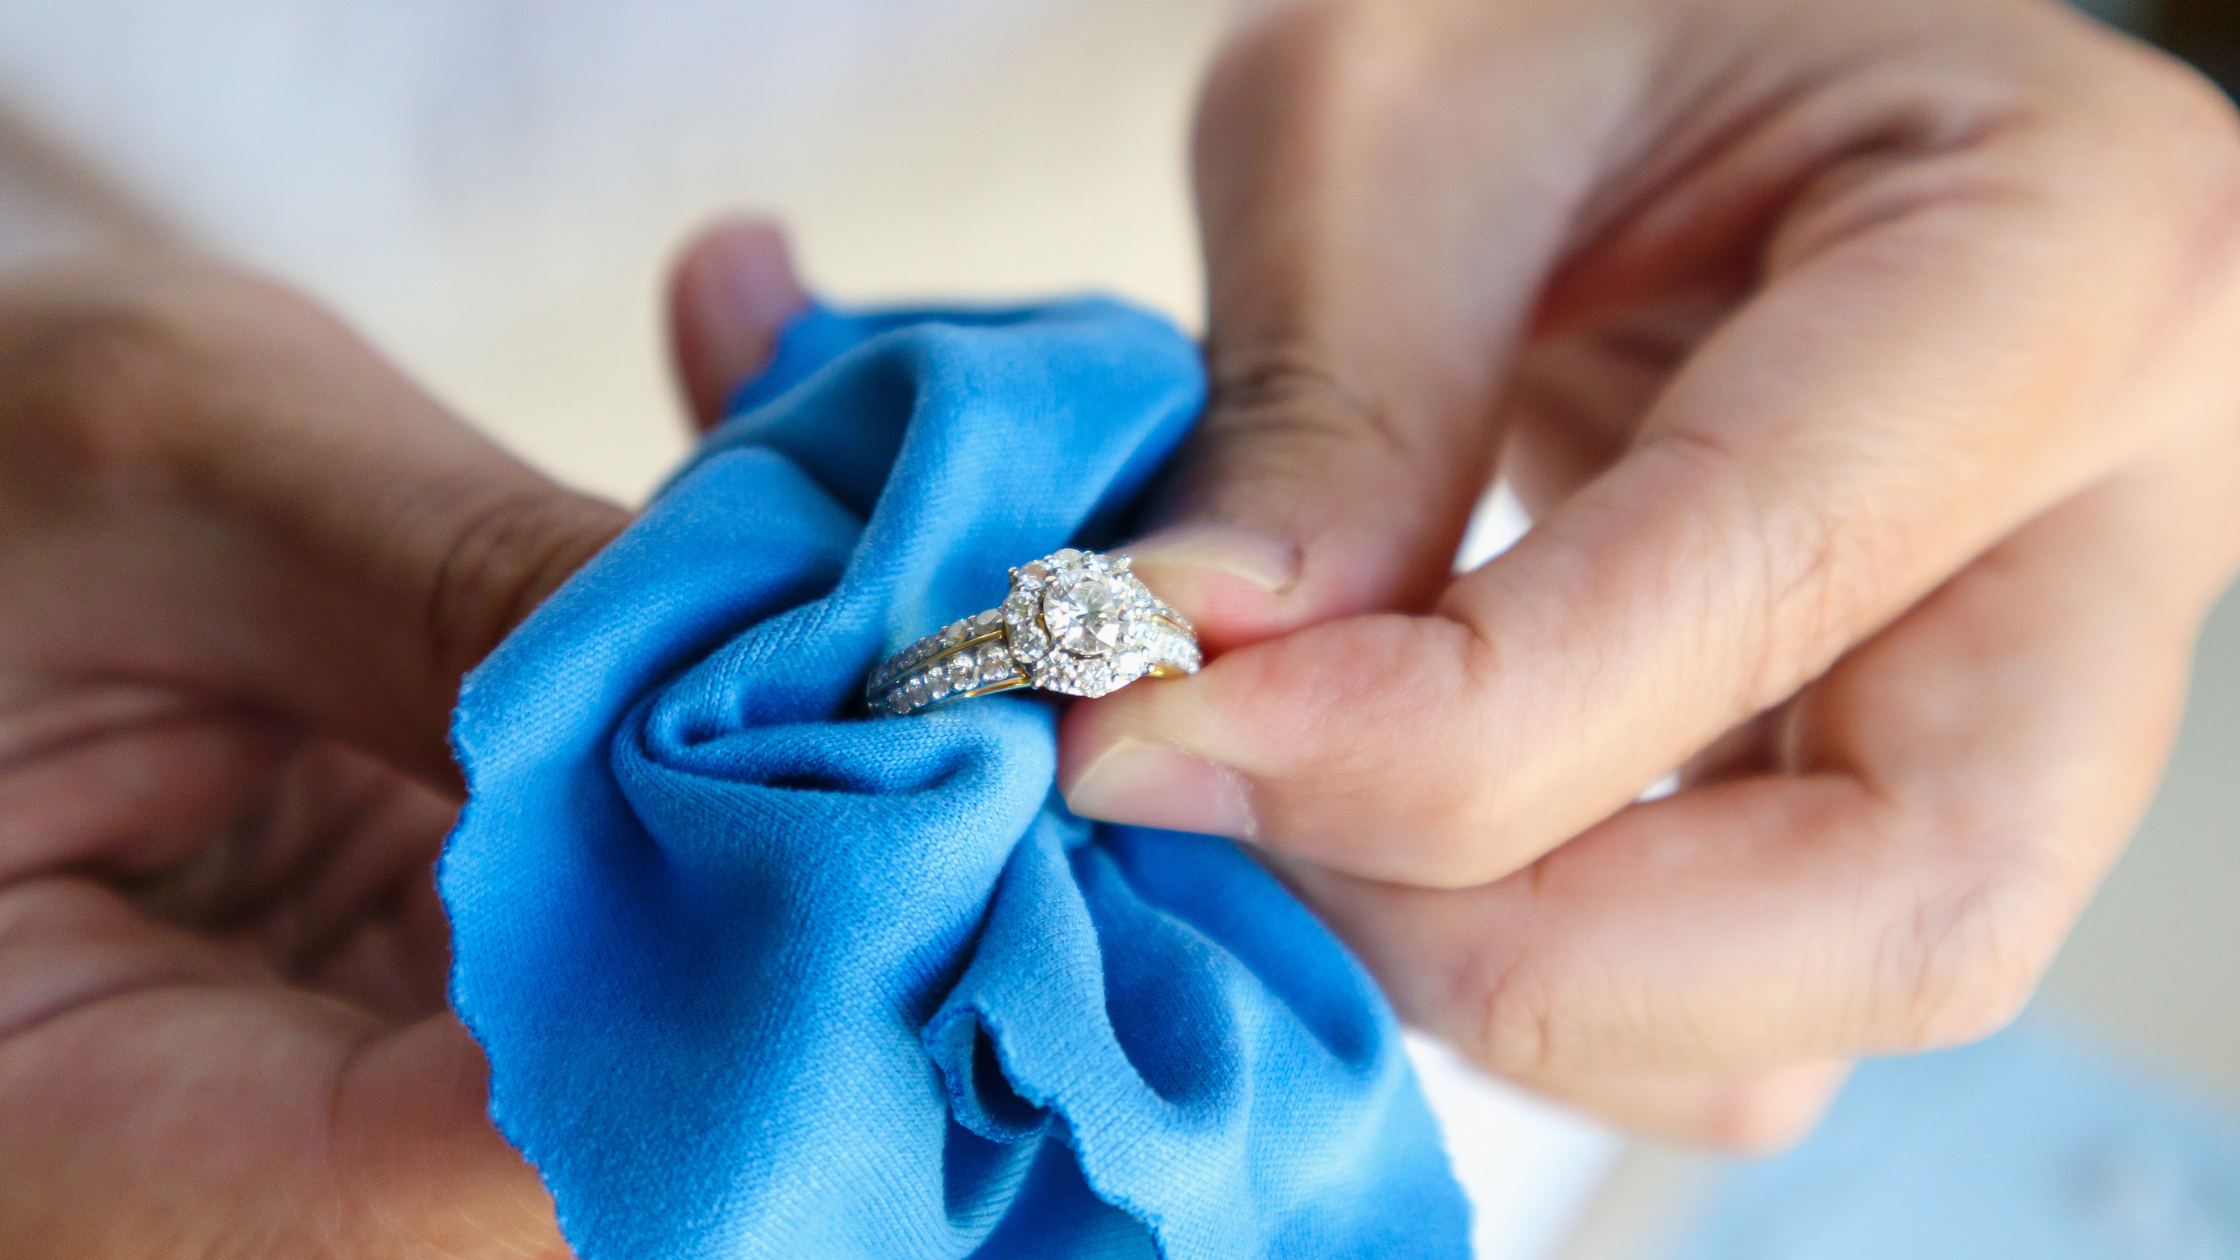 How To Clean Diamond Ring With Windex